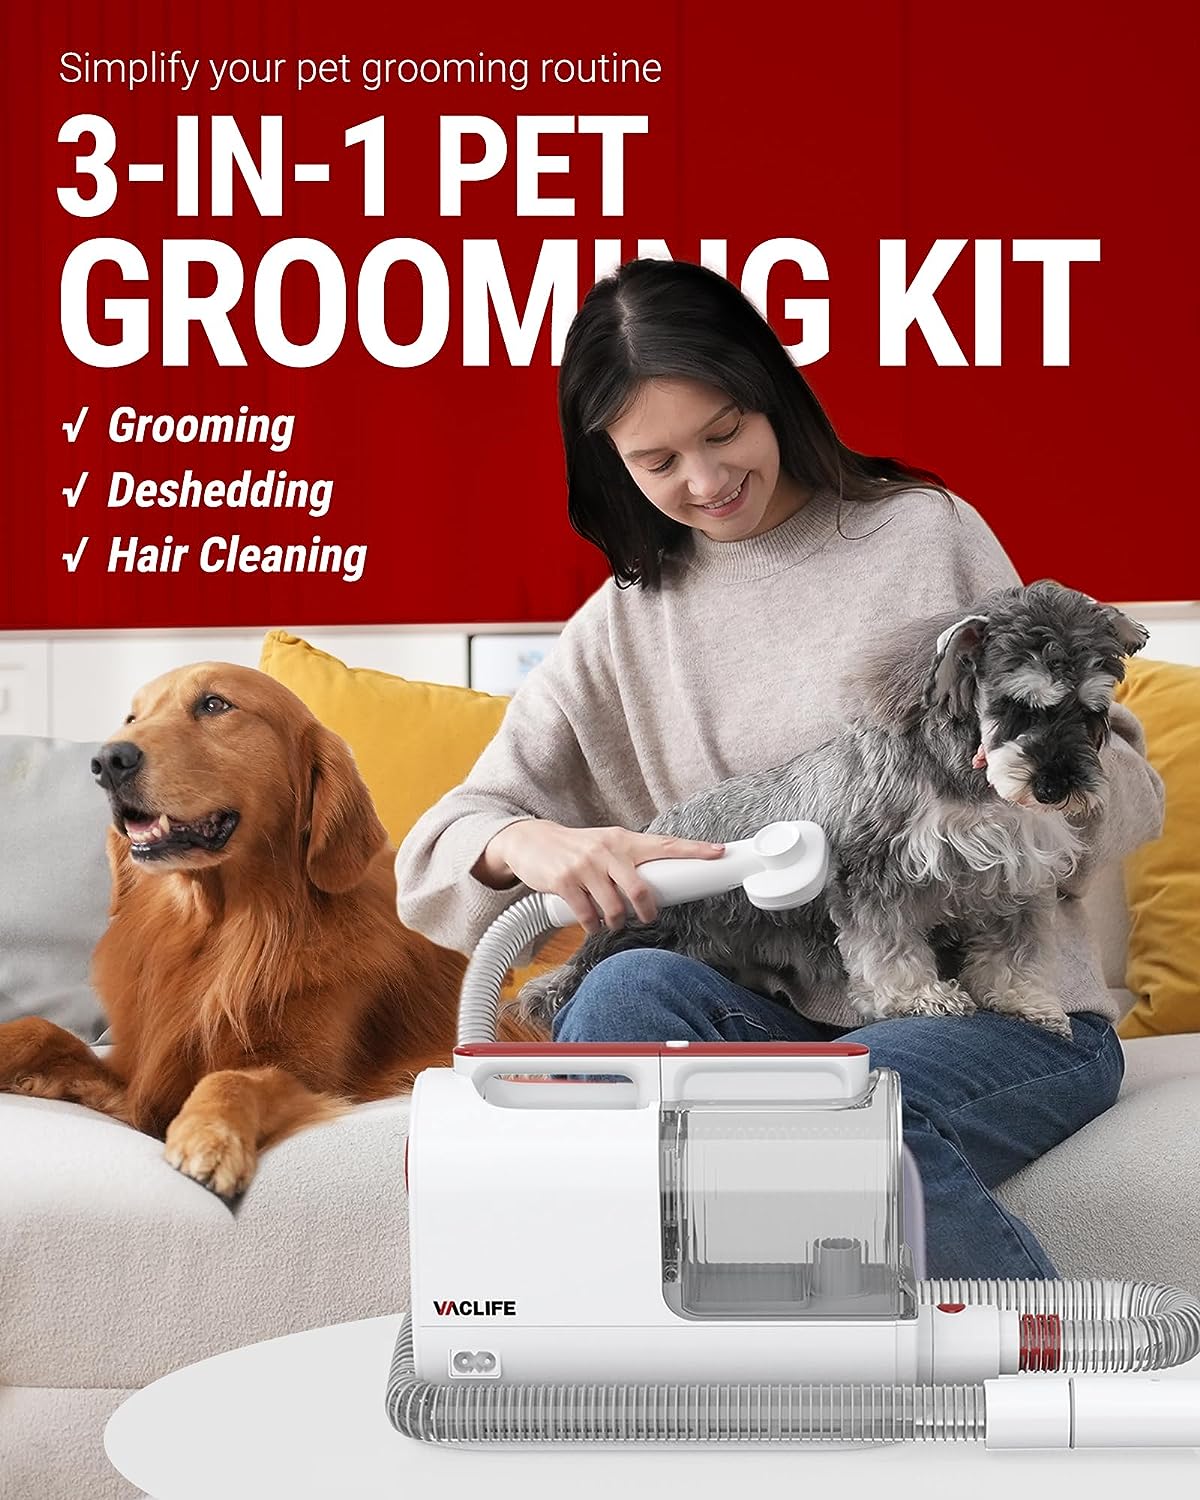 VacLife Pet Hair Vacuum For Shedding Grooming With Dog Clipper - Multipurpose Dog Grooming Kit With Brushes And Other Grooming Tools For Dogs And Cats - Low-Noise - White And Red